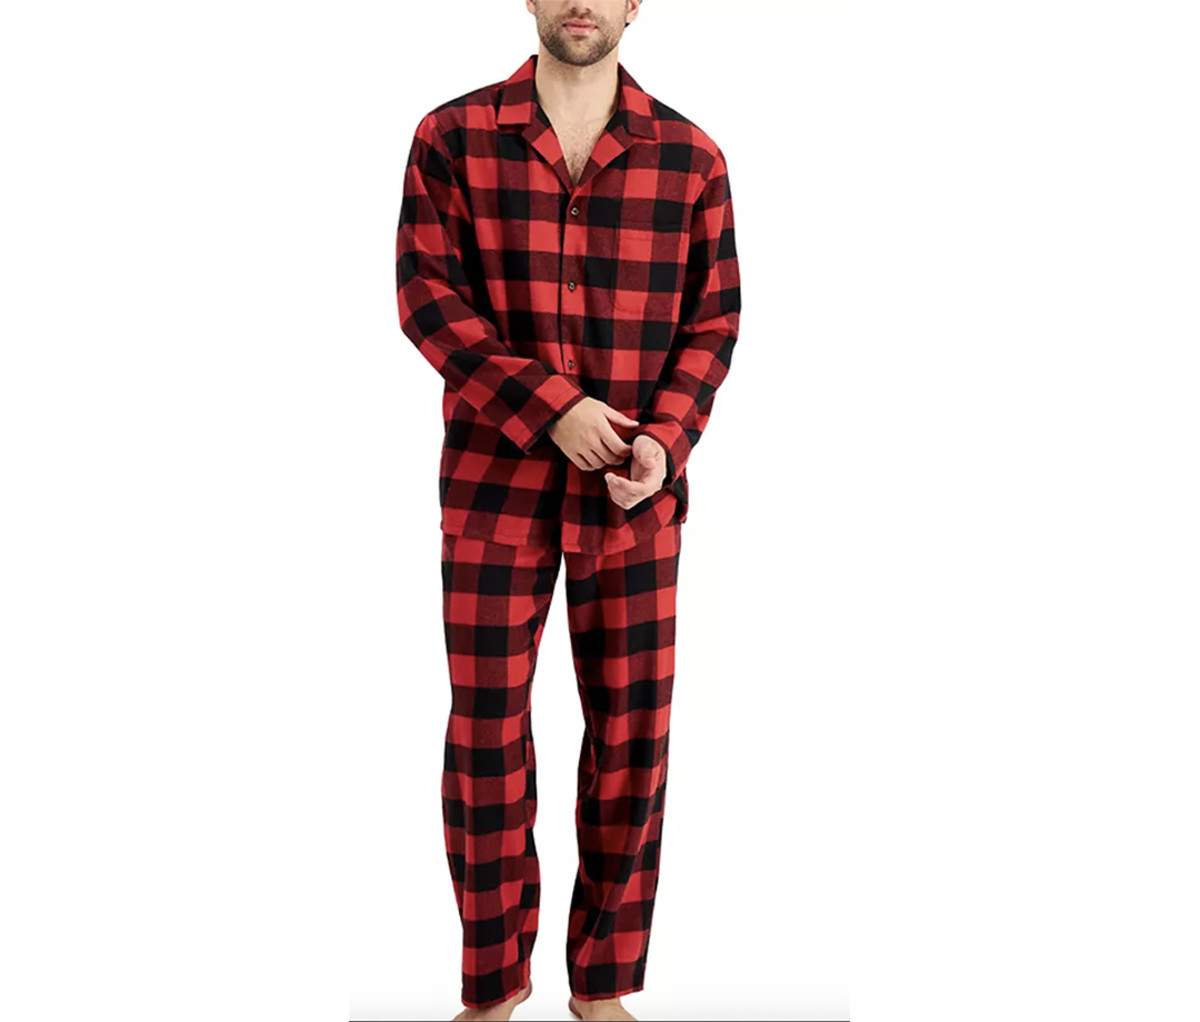 This Flannel Pajama Set is Perfect For When You Gotta Work From Home ...